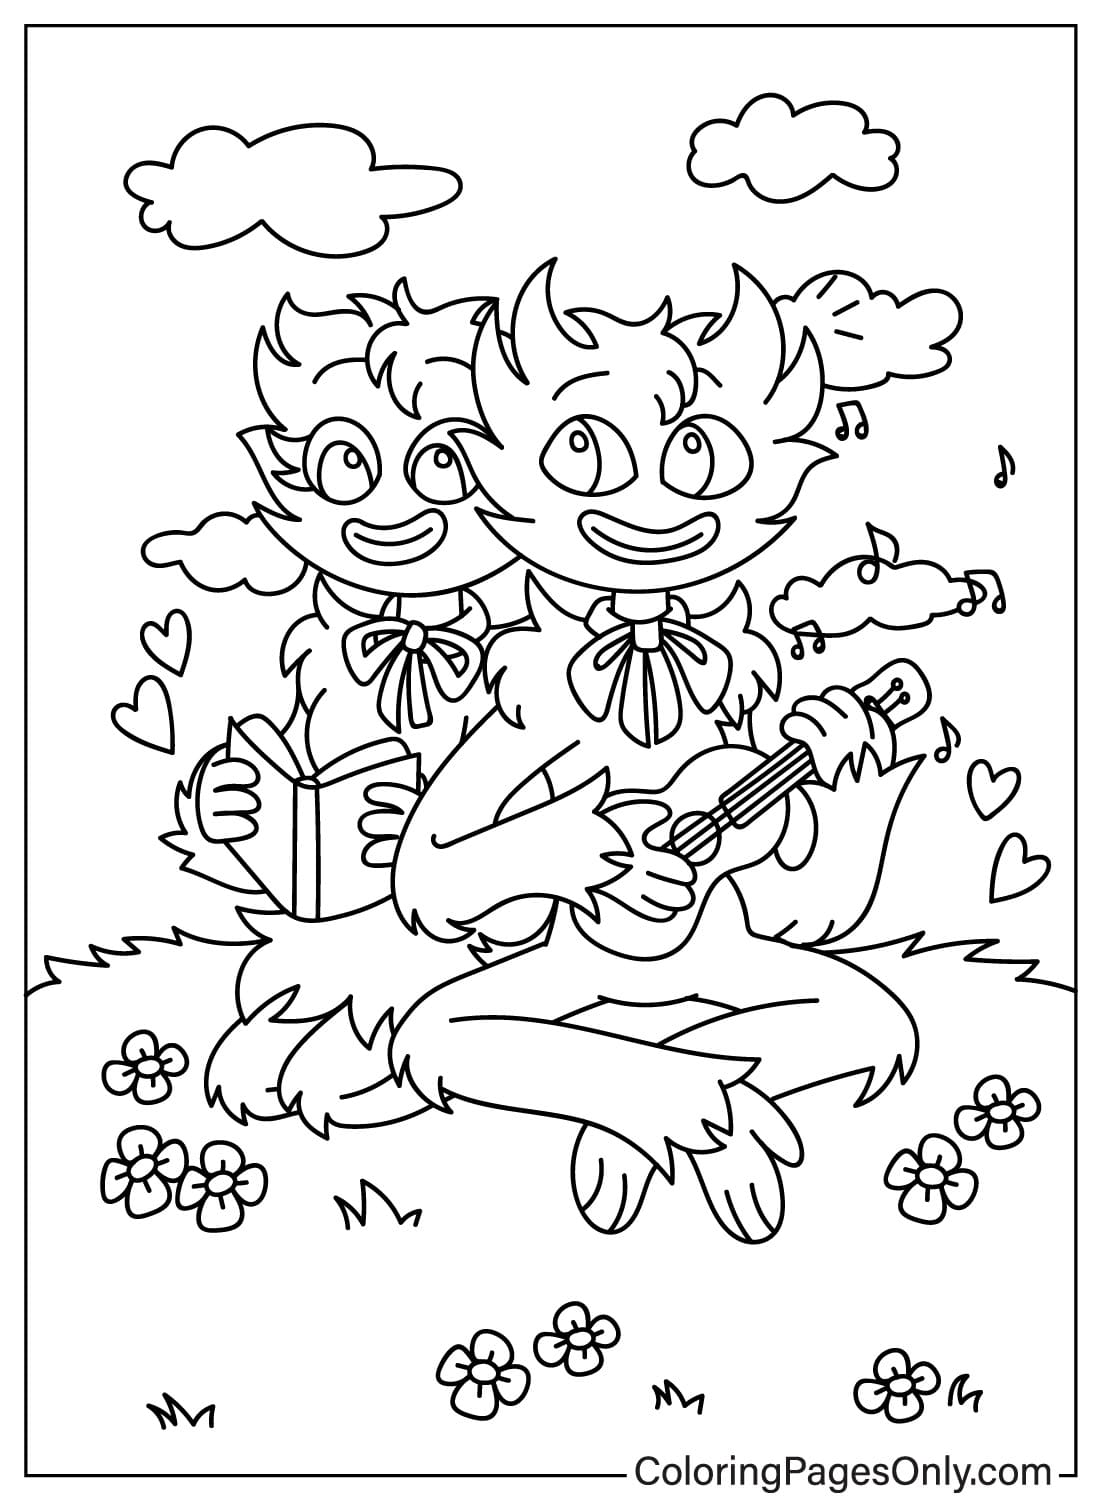 Huggy Wuggy, Kissy Missy Coloring Page Free from Poppy Playtime